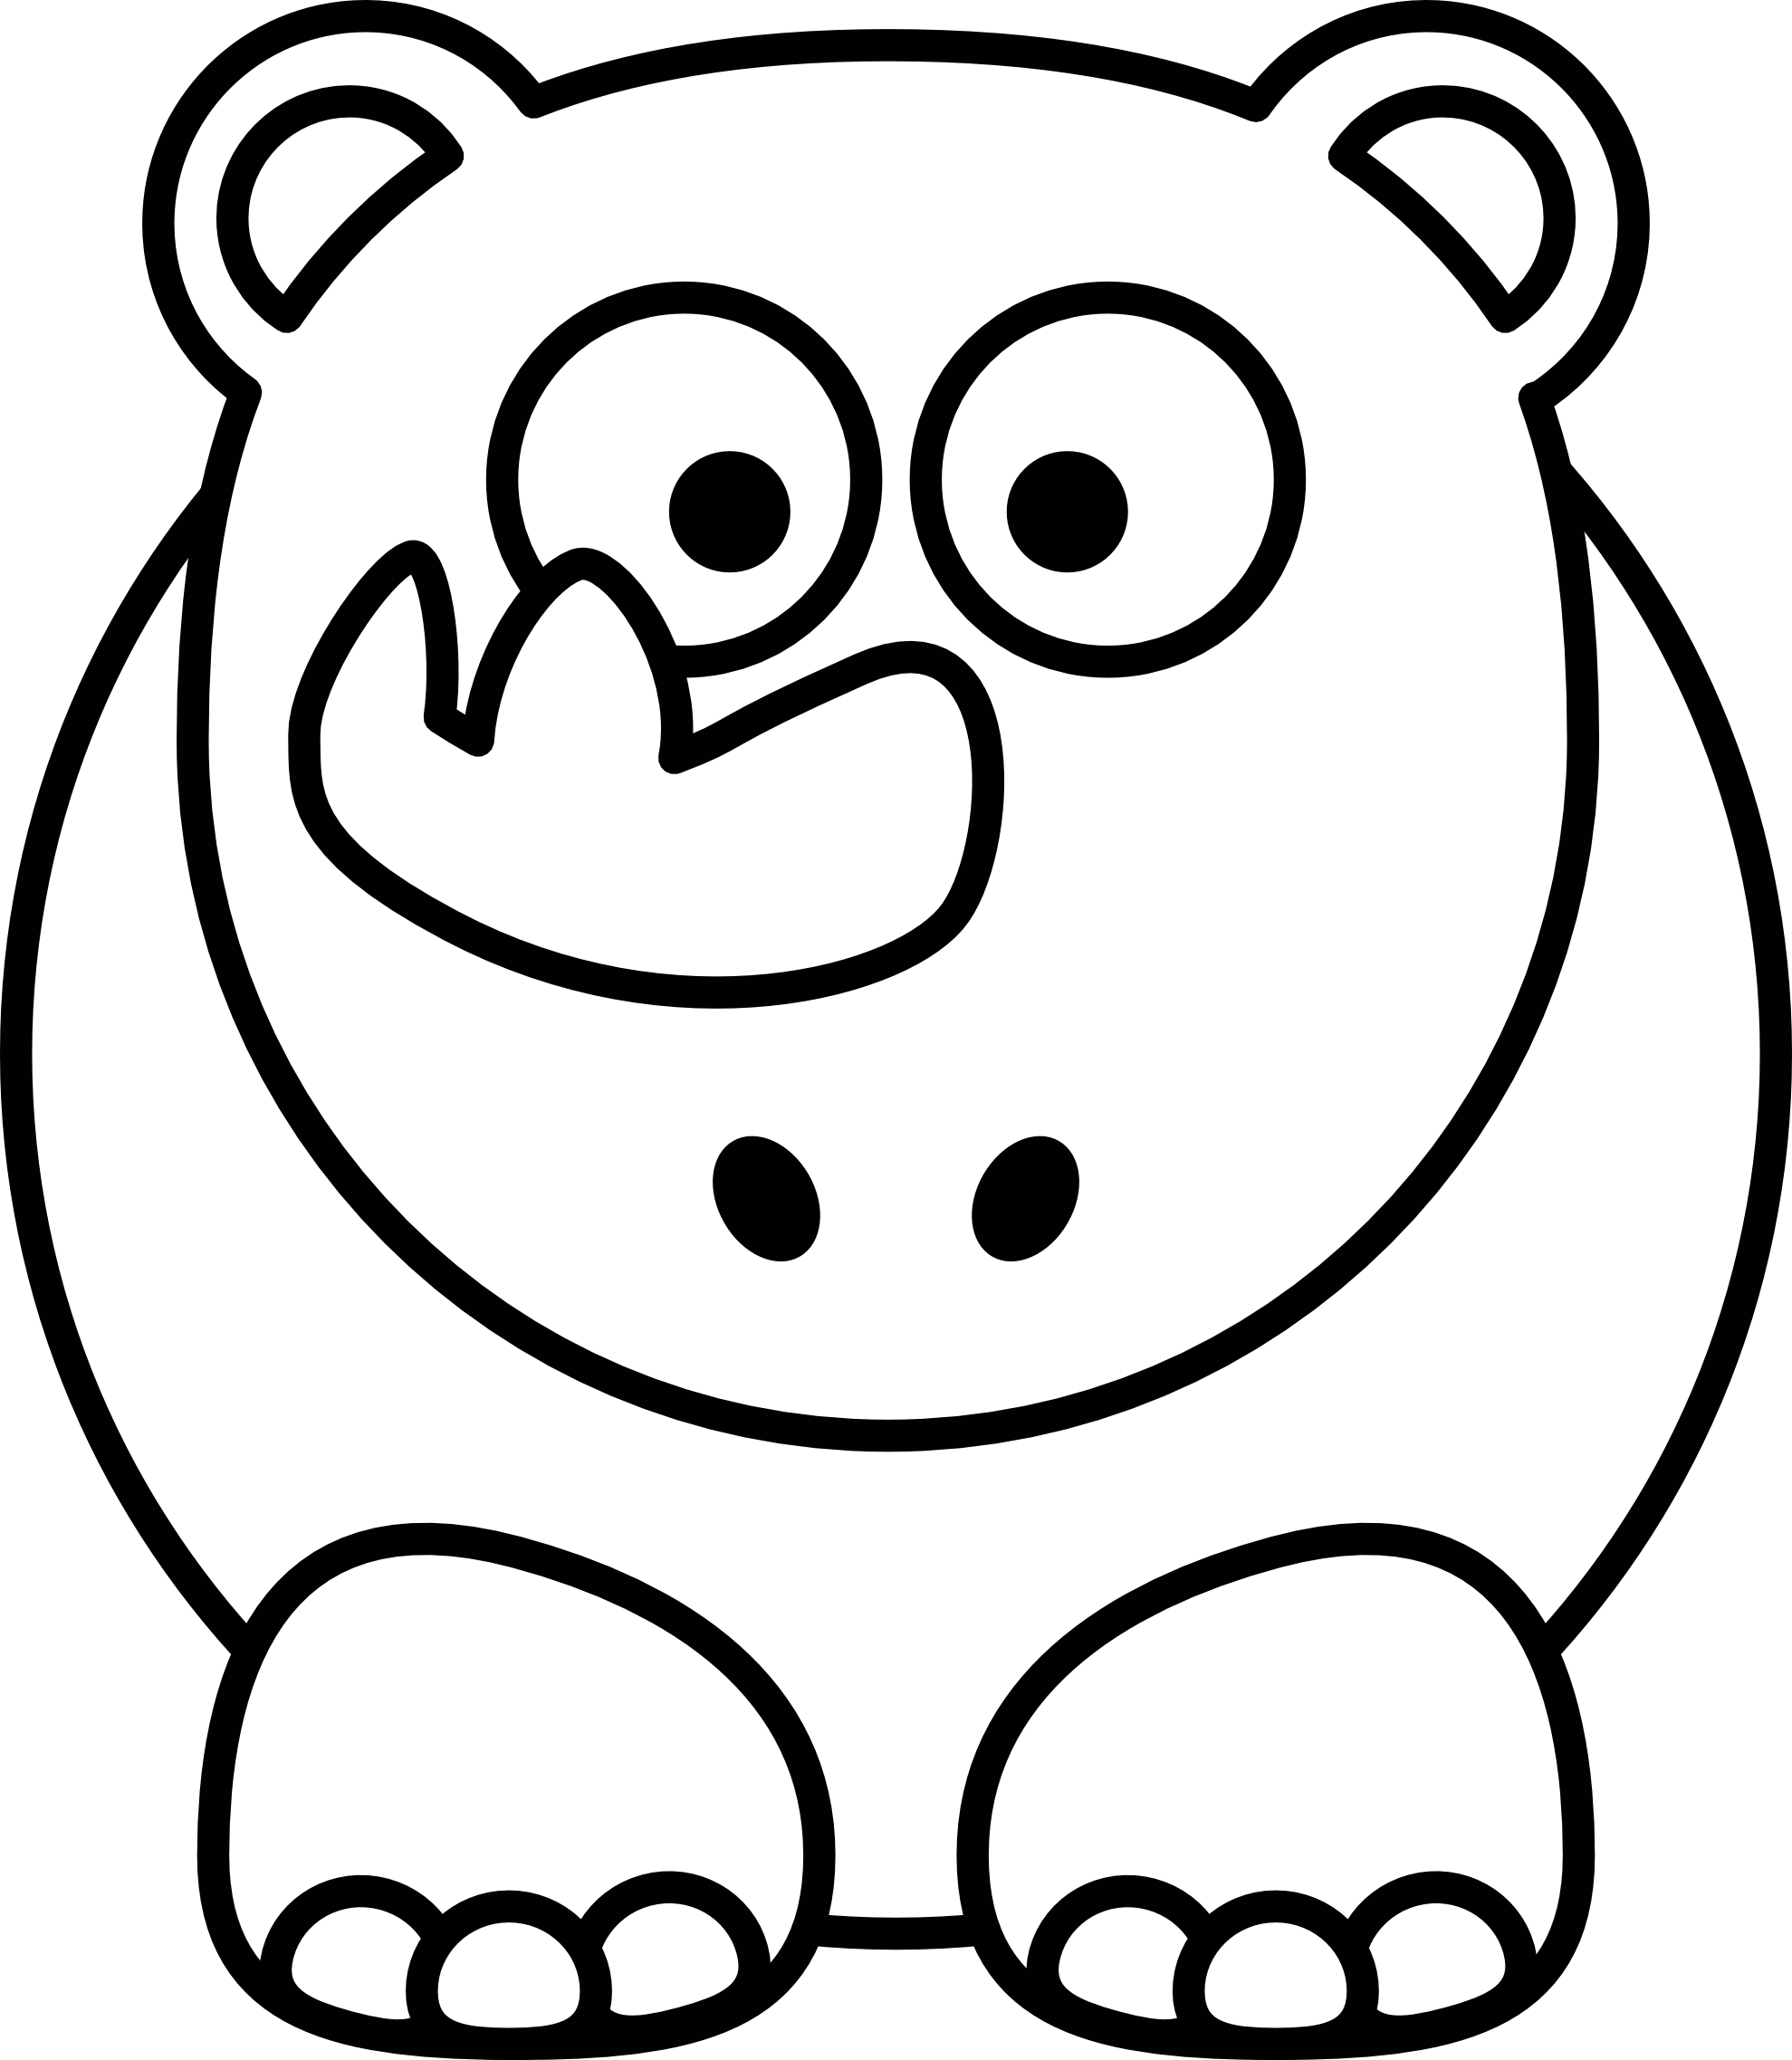 Black And White Clip Art Animals - Clipart library